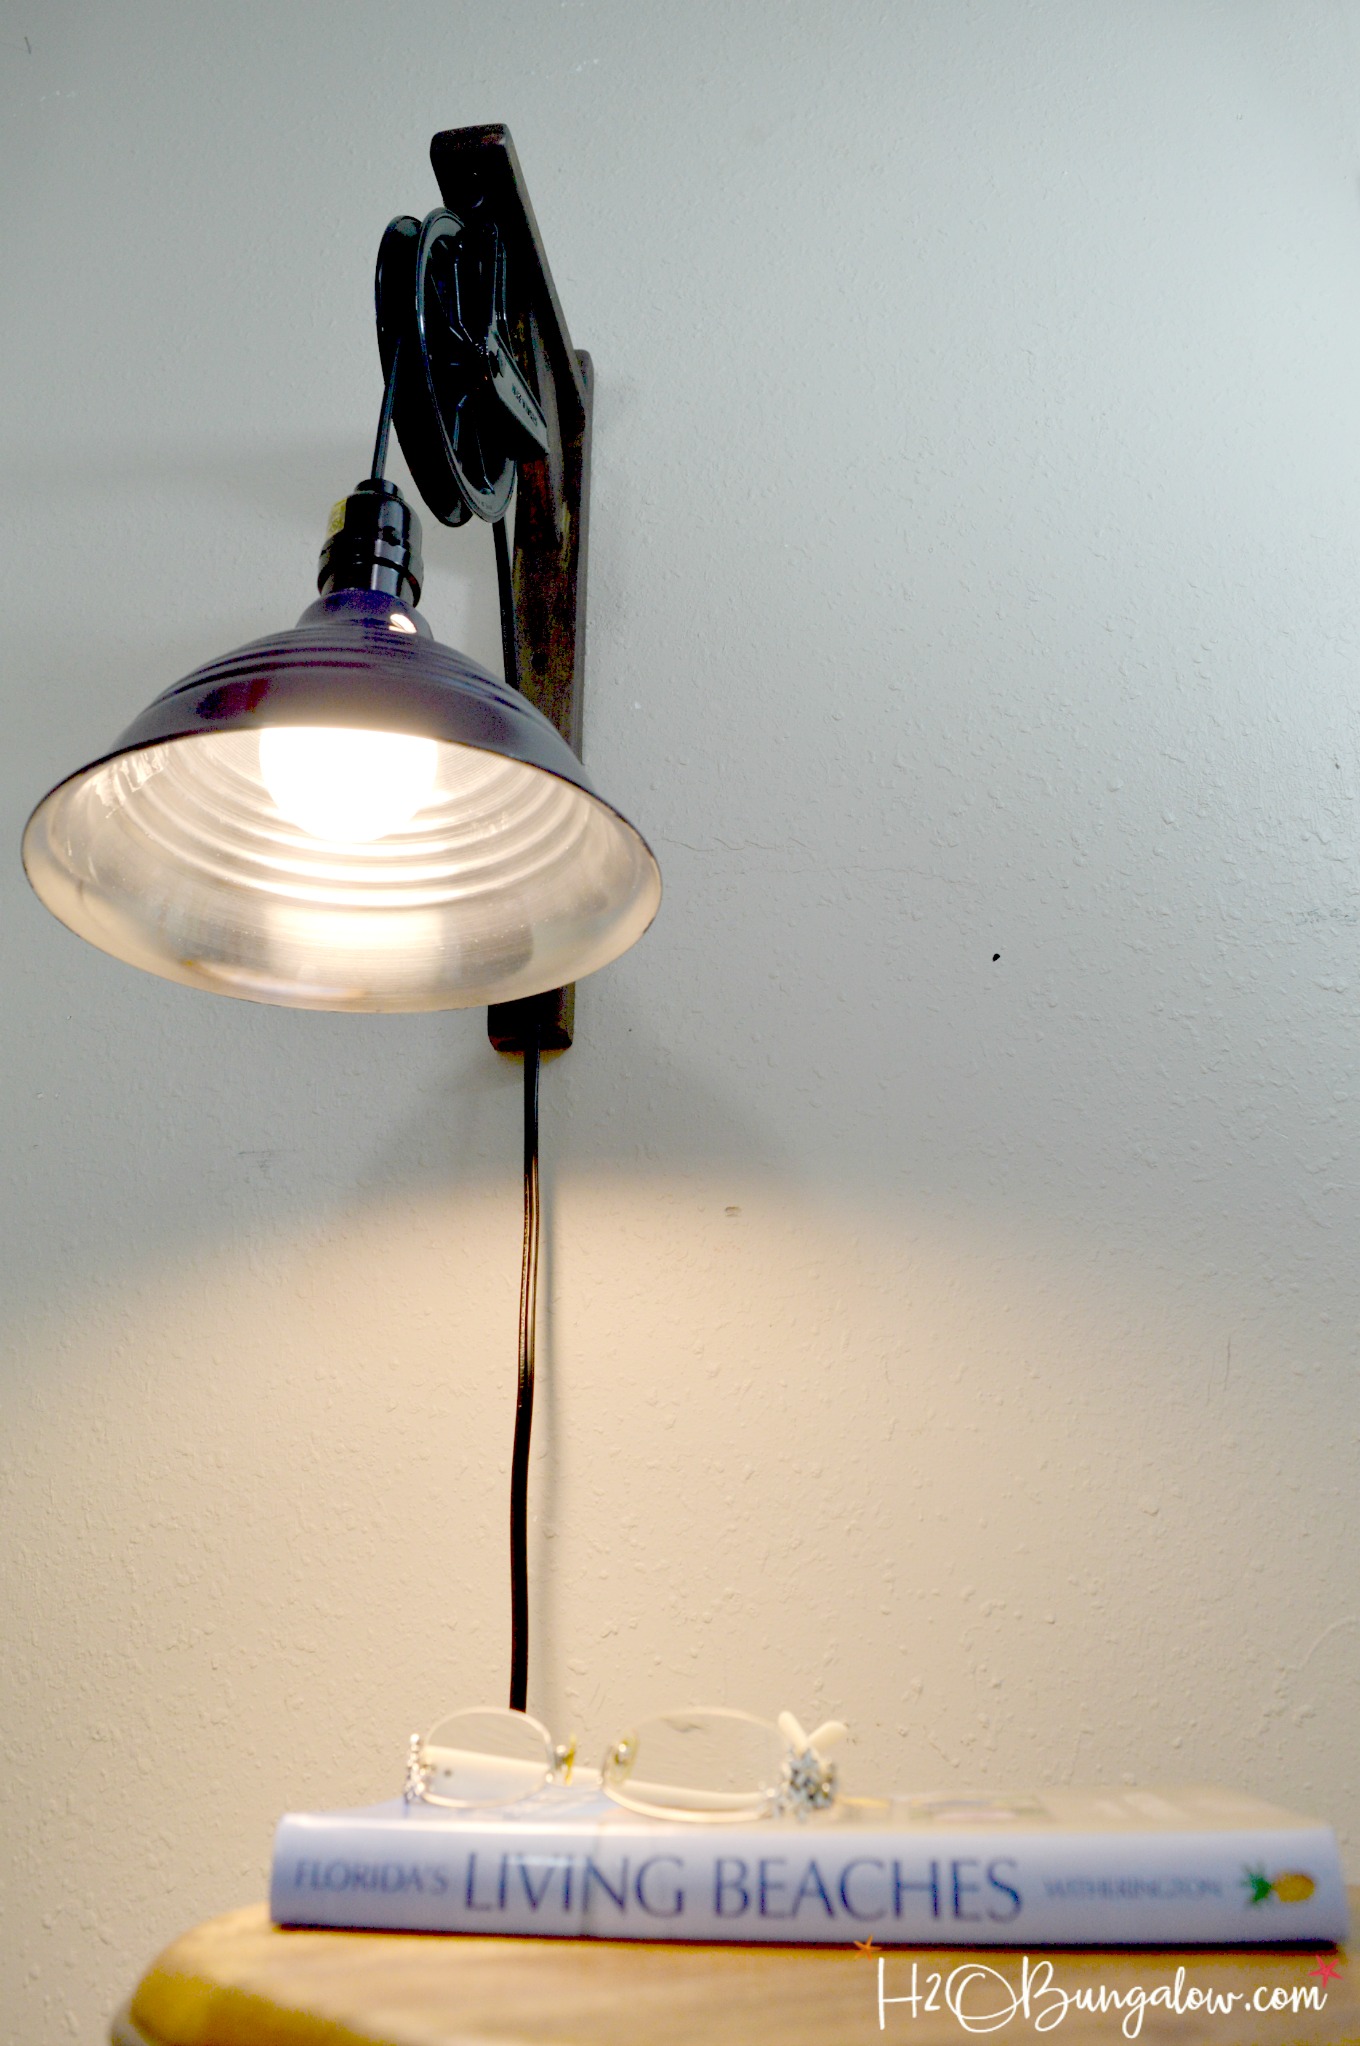  Use this wall sconce tutorial DIY vintage style pulley light to make a fabulous home decor piece for under $15! Looks just like an upscale store version.